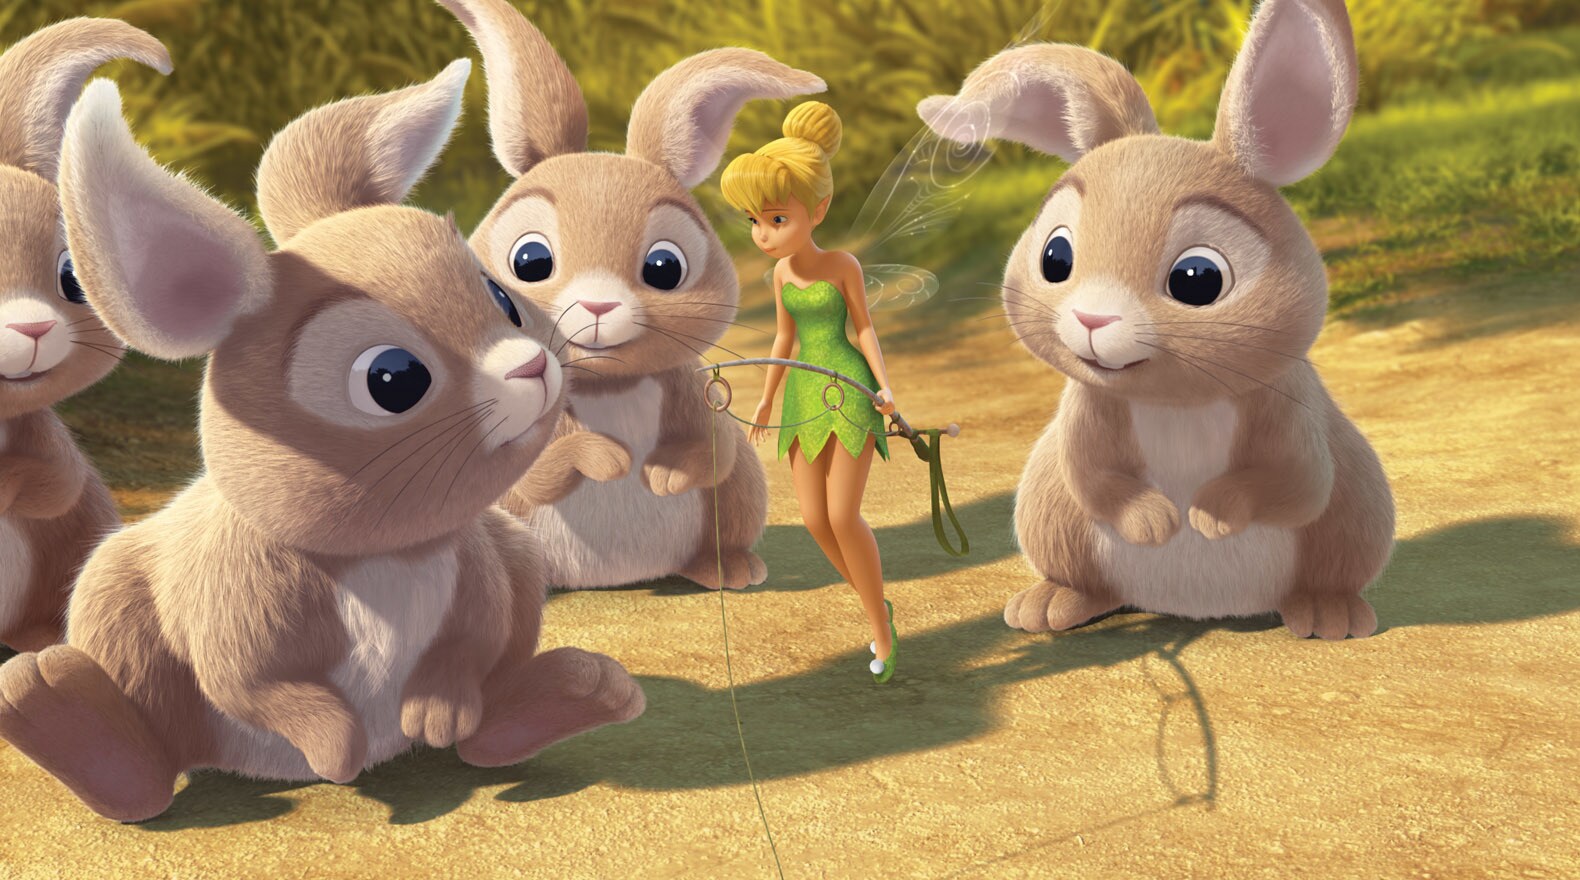 Tinker Bell wishes she could join the bunnies into the Winter Woods.